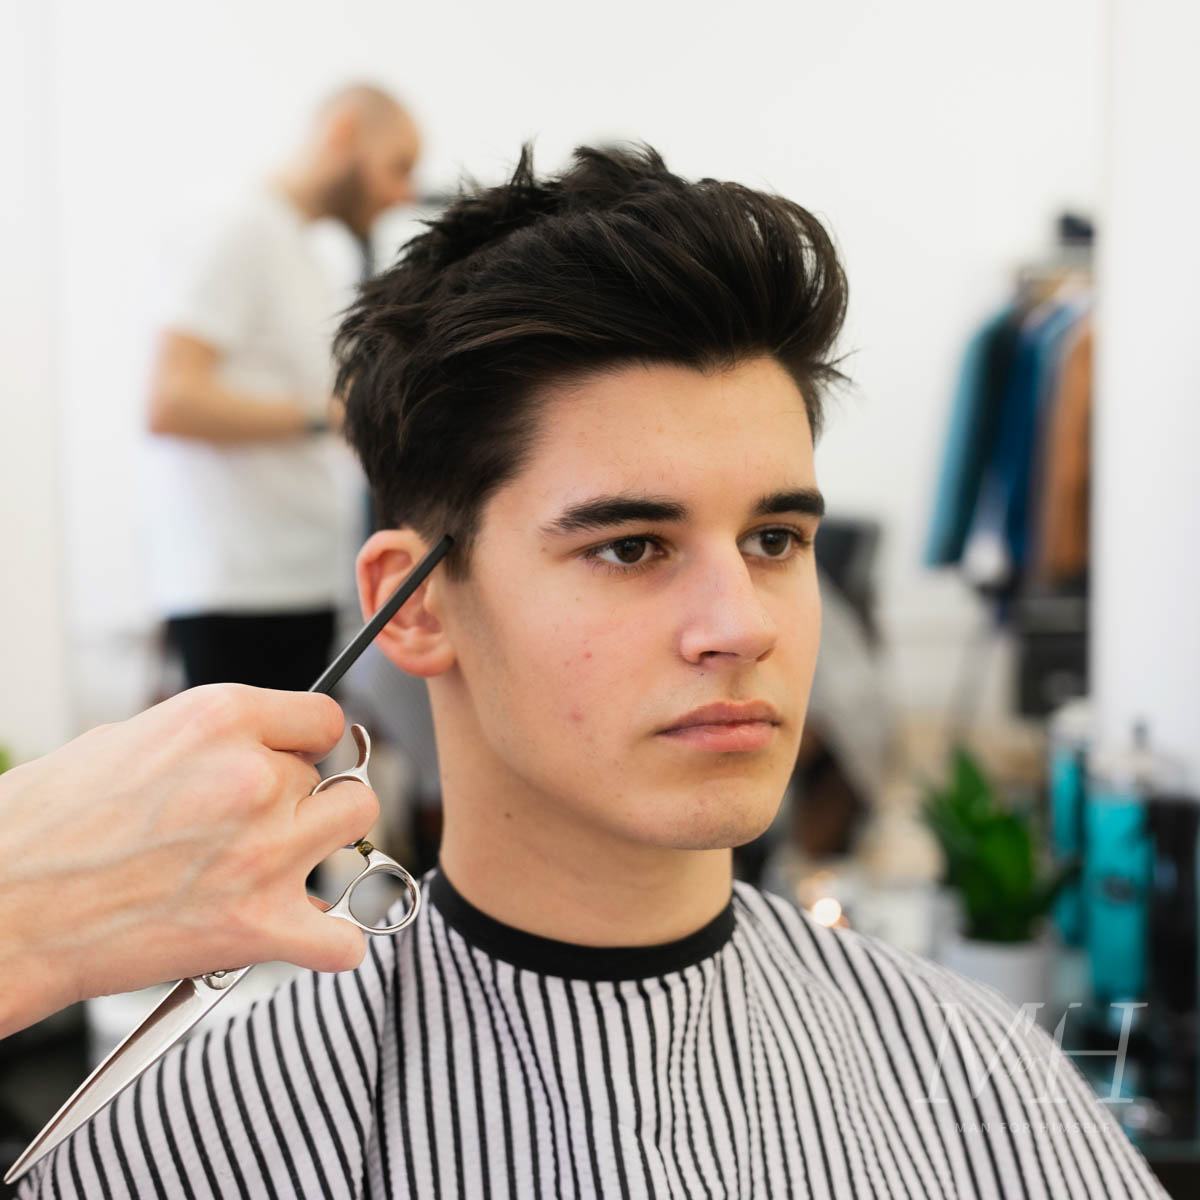 The 20 Men's Hairstyle Trends For Summer 20   Man For Himself